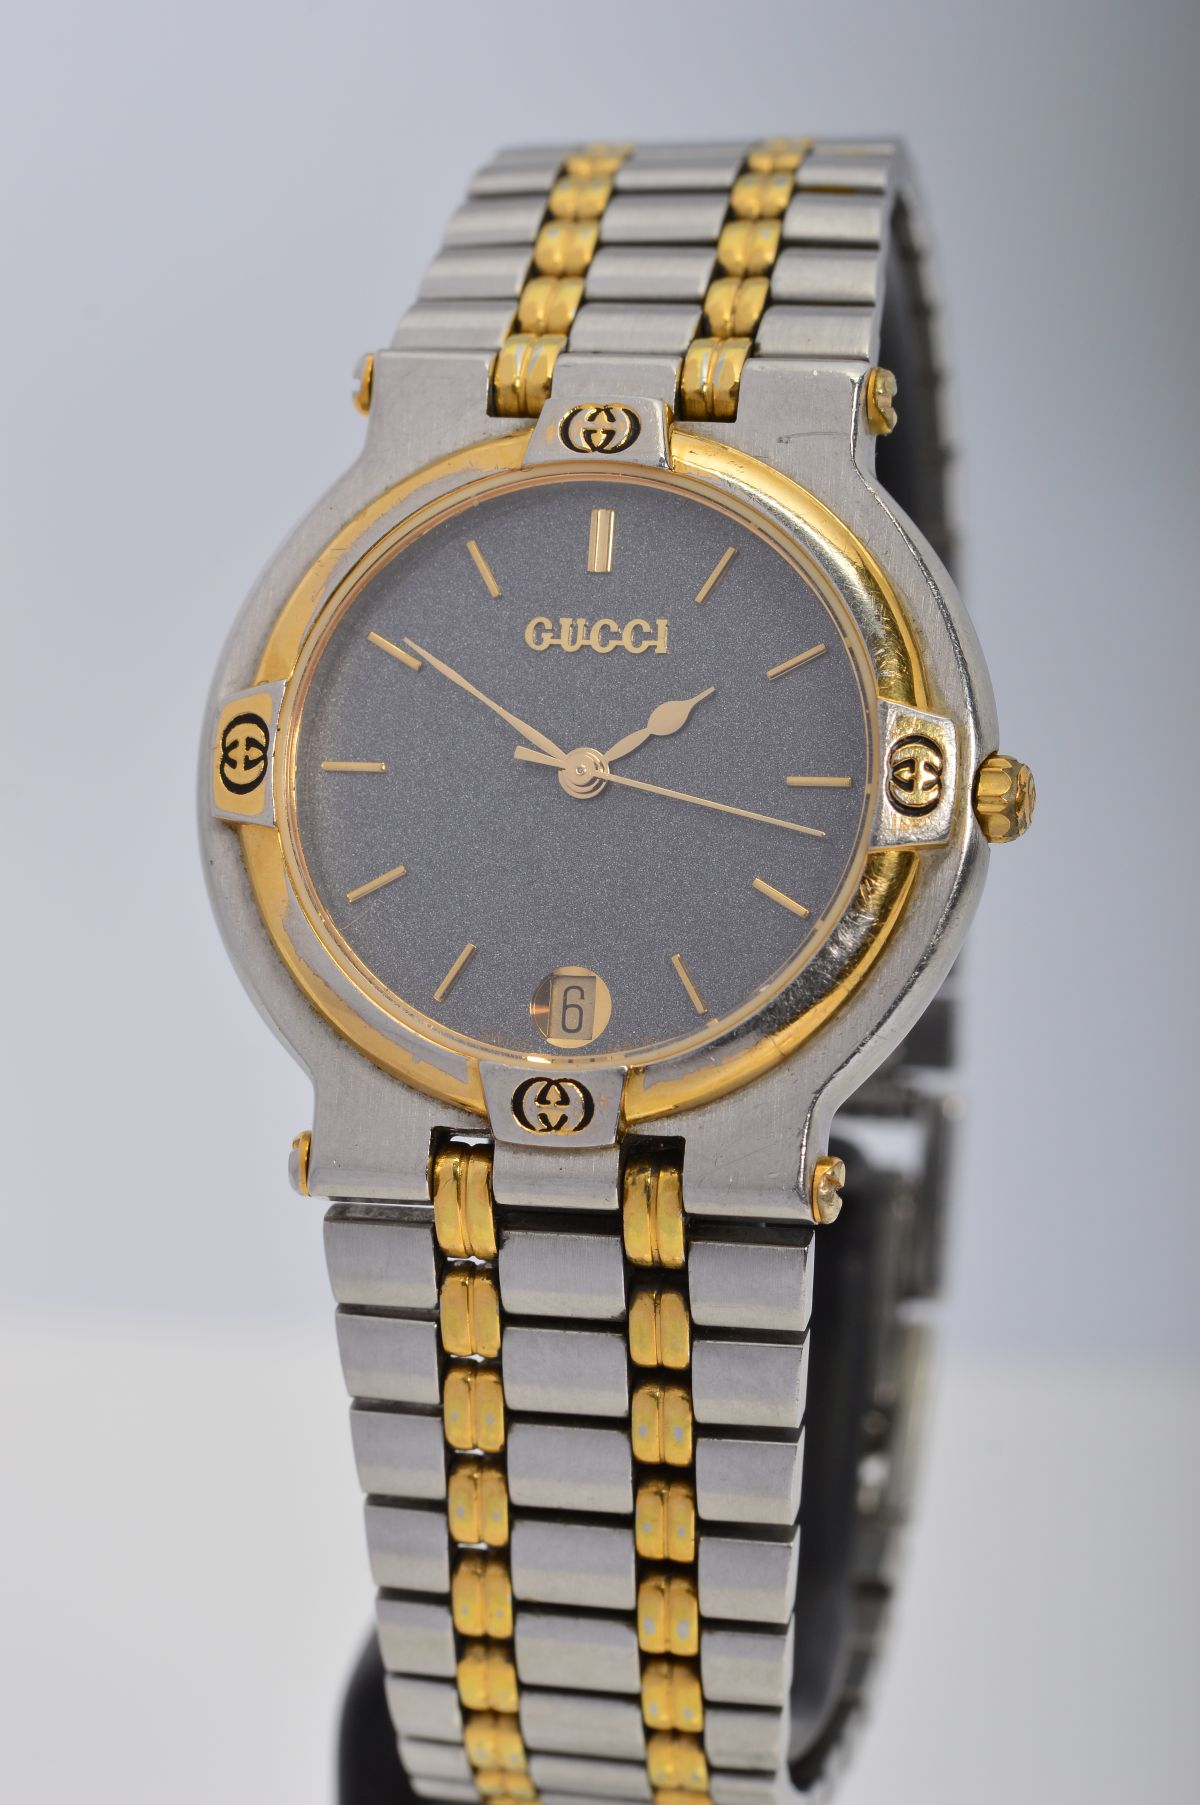 A GUCCI STAINLESS STEEL WRISTWATCH, the dark grey face with baton hour markers, date dial and gold